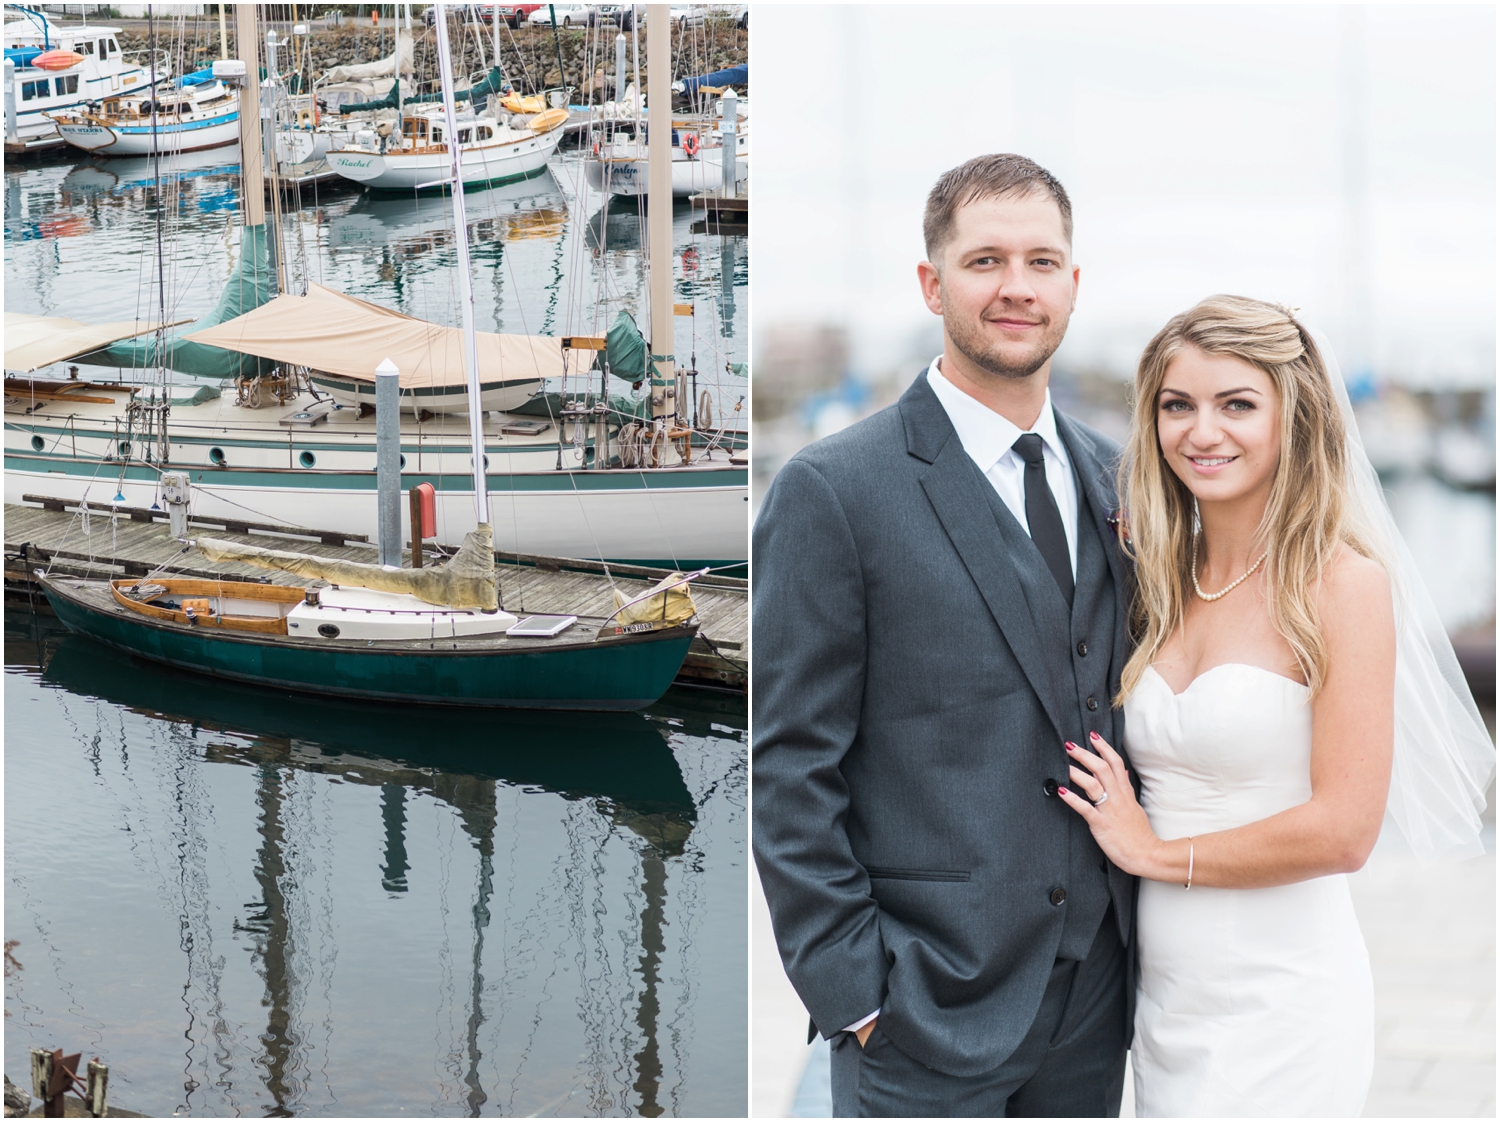 Chris & Laurens Nautical Port Townsend Wedding. Fall.  Old vintage Wooden Boats. Driftwood. Sand. Pre-Ceremony cocktails. Chalkboard Signs. 